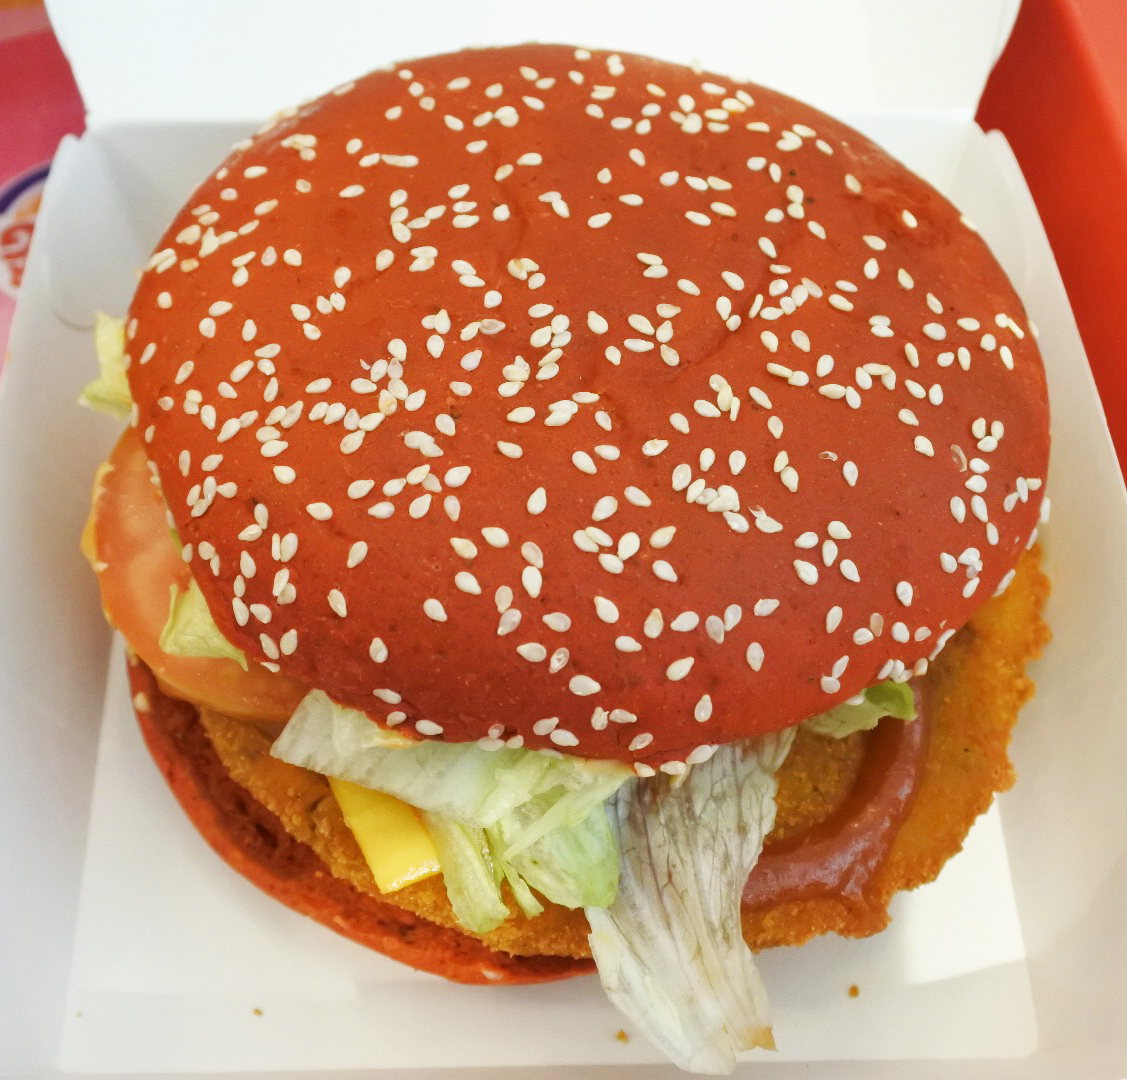 Angry red whopper